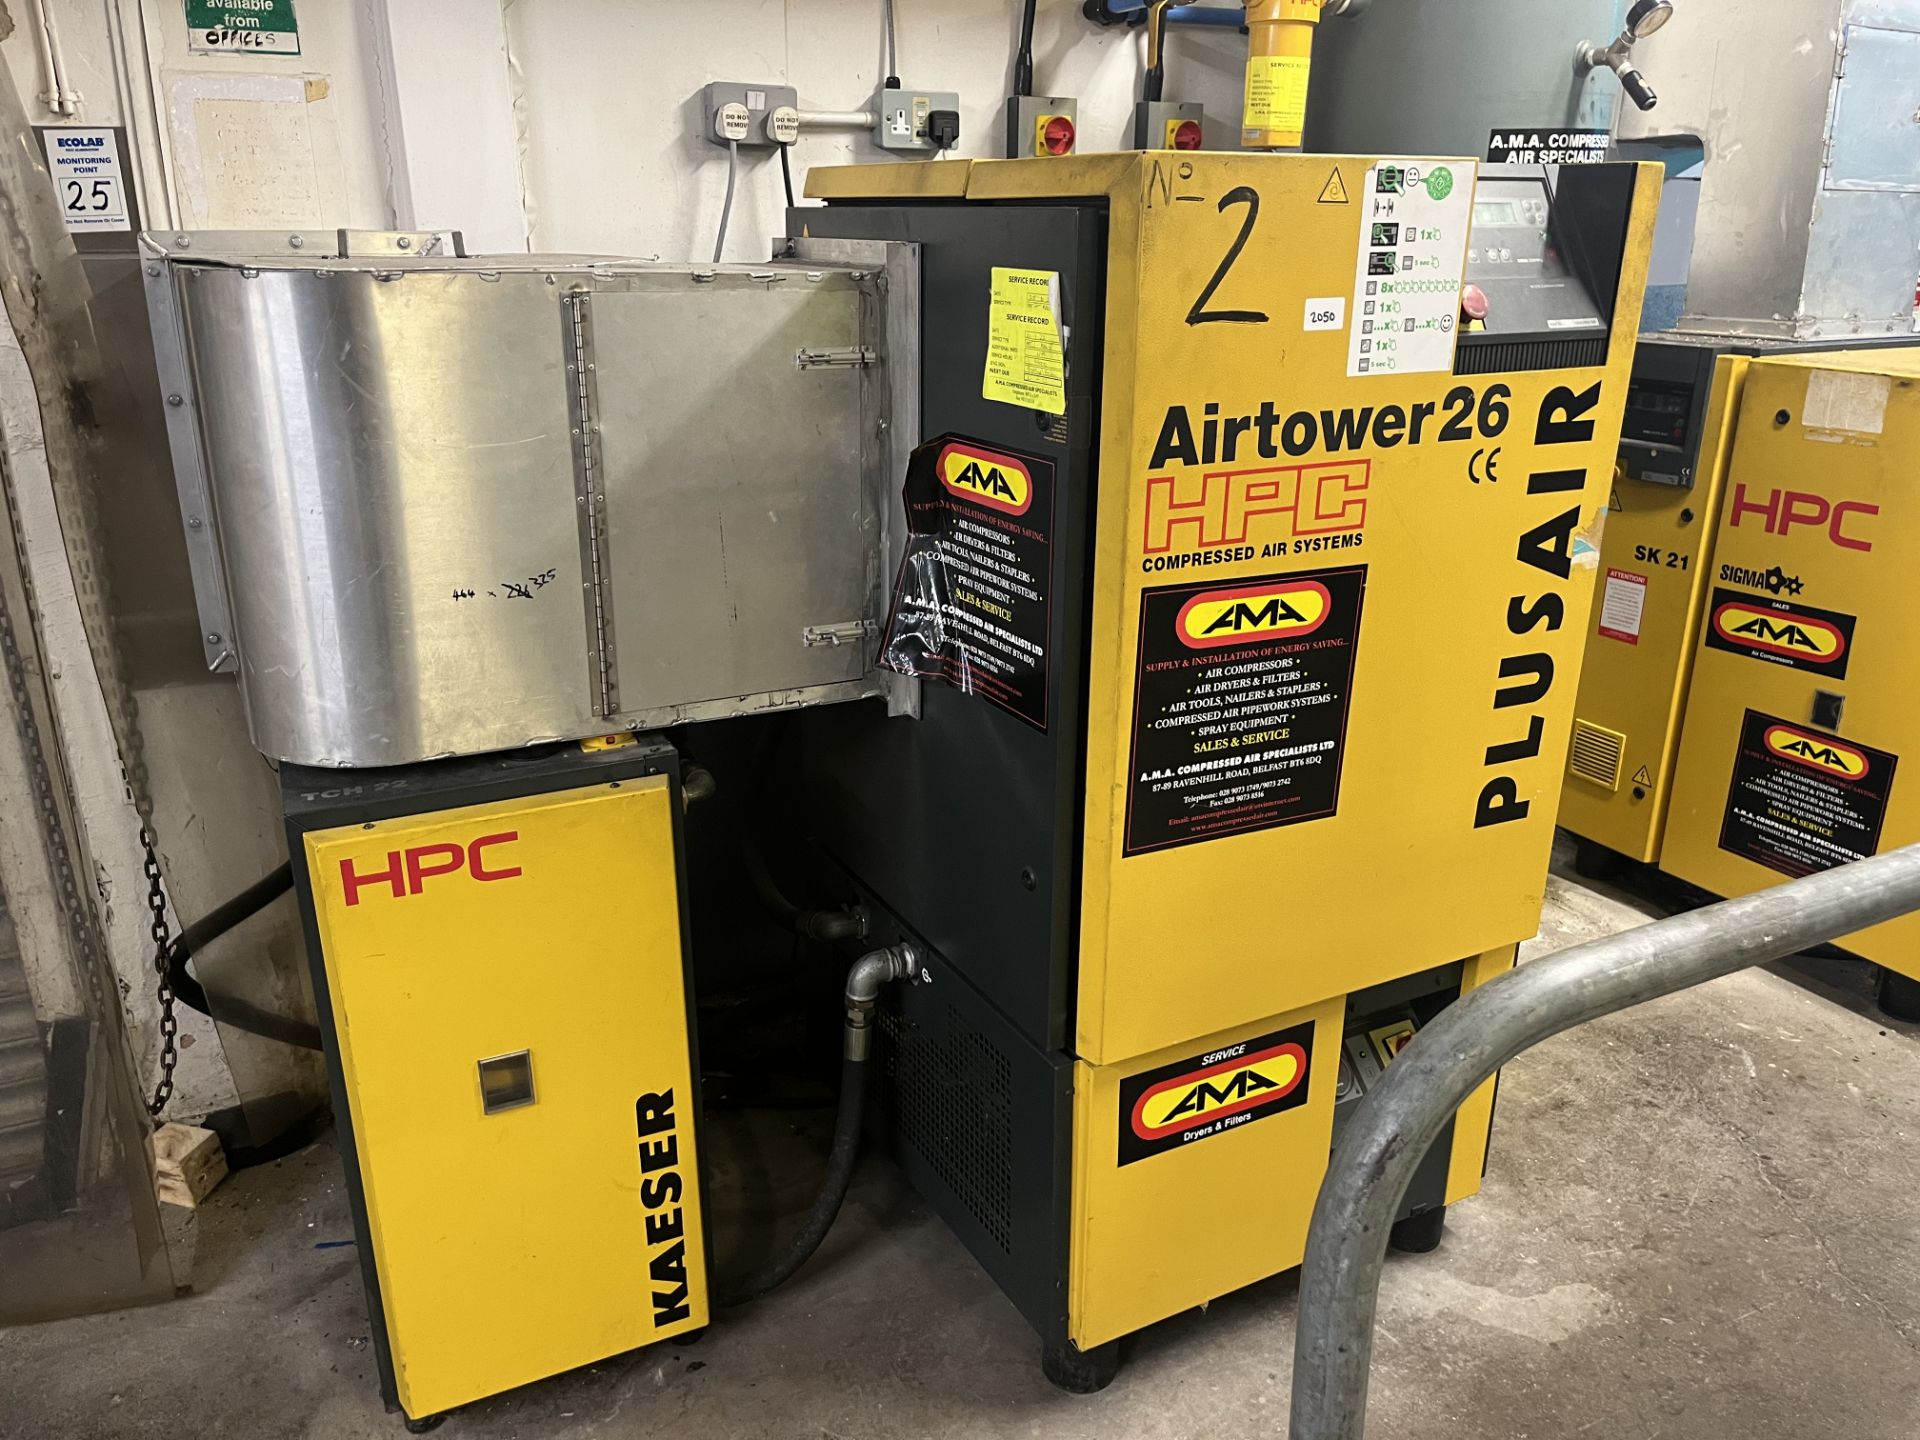 HPC AIRTOWER 26 COMPRESSOR  COMPRESSOR  COLLECTION ARMAGH N.IRELAND - Image 7 of 7